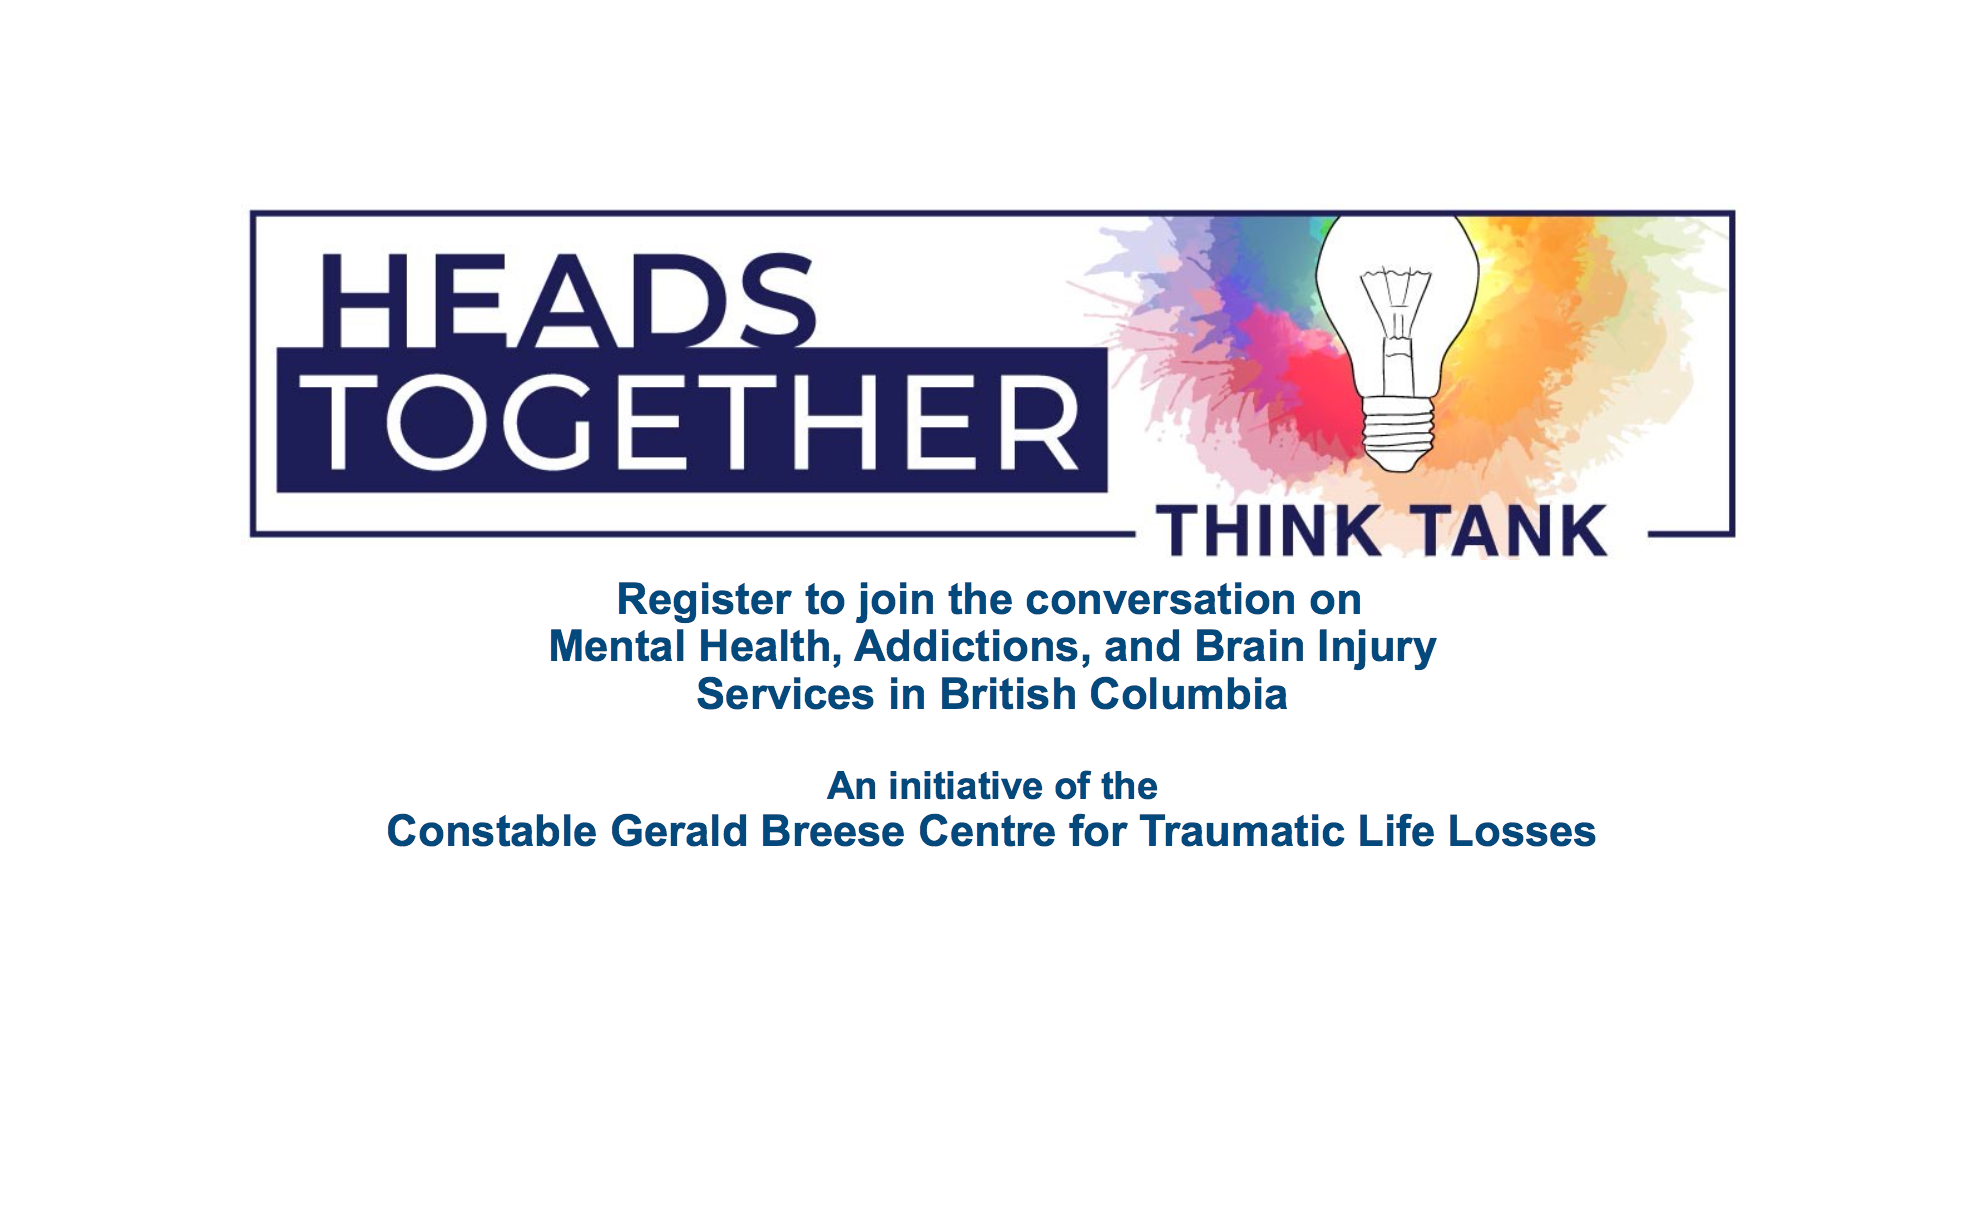 Heads Together Think Tank event image